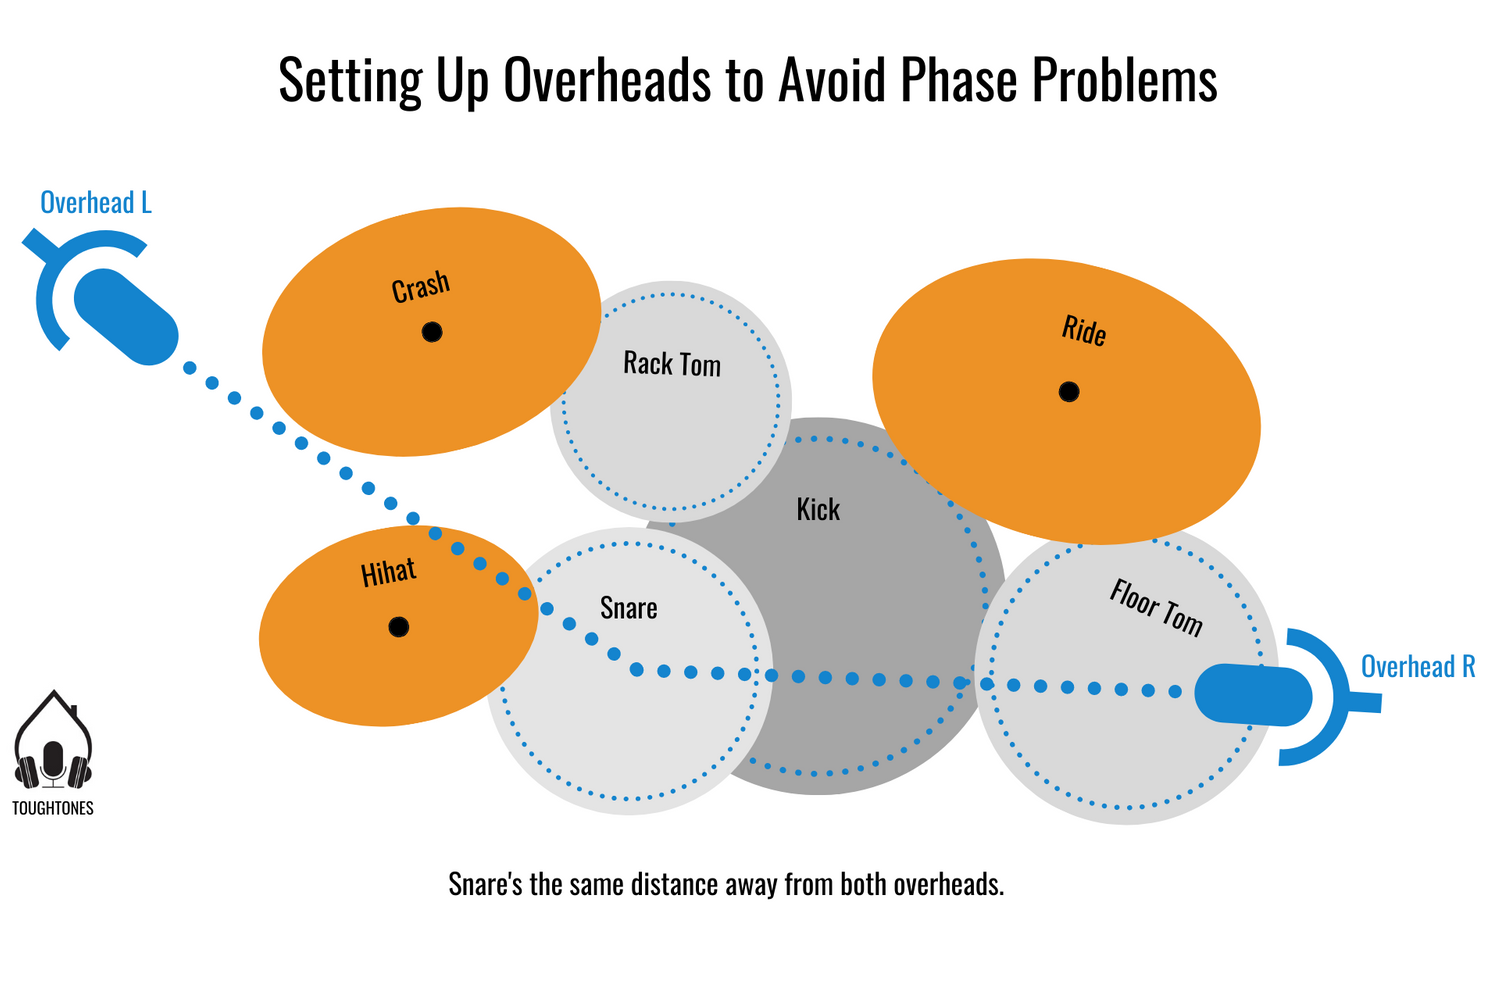 Setting up overheads to avoid phase problems